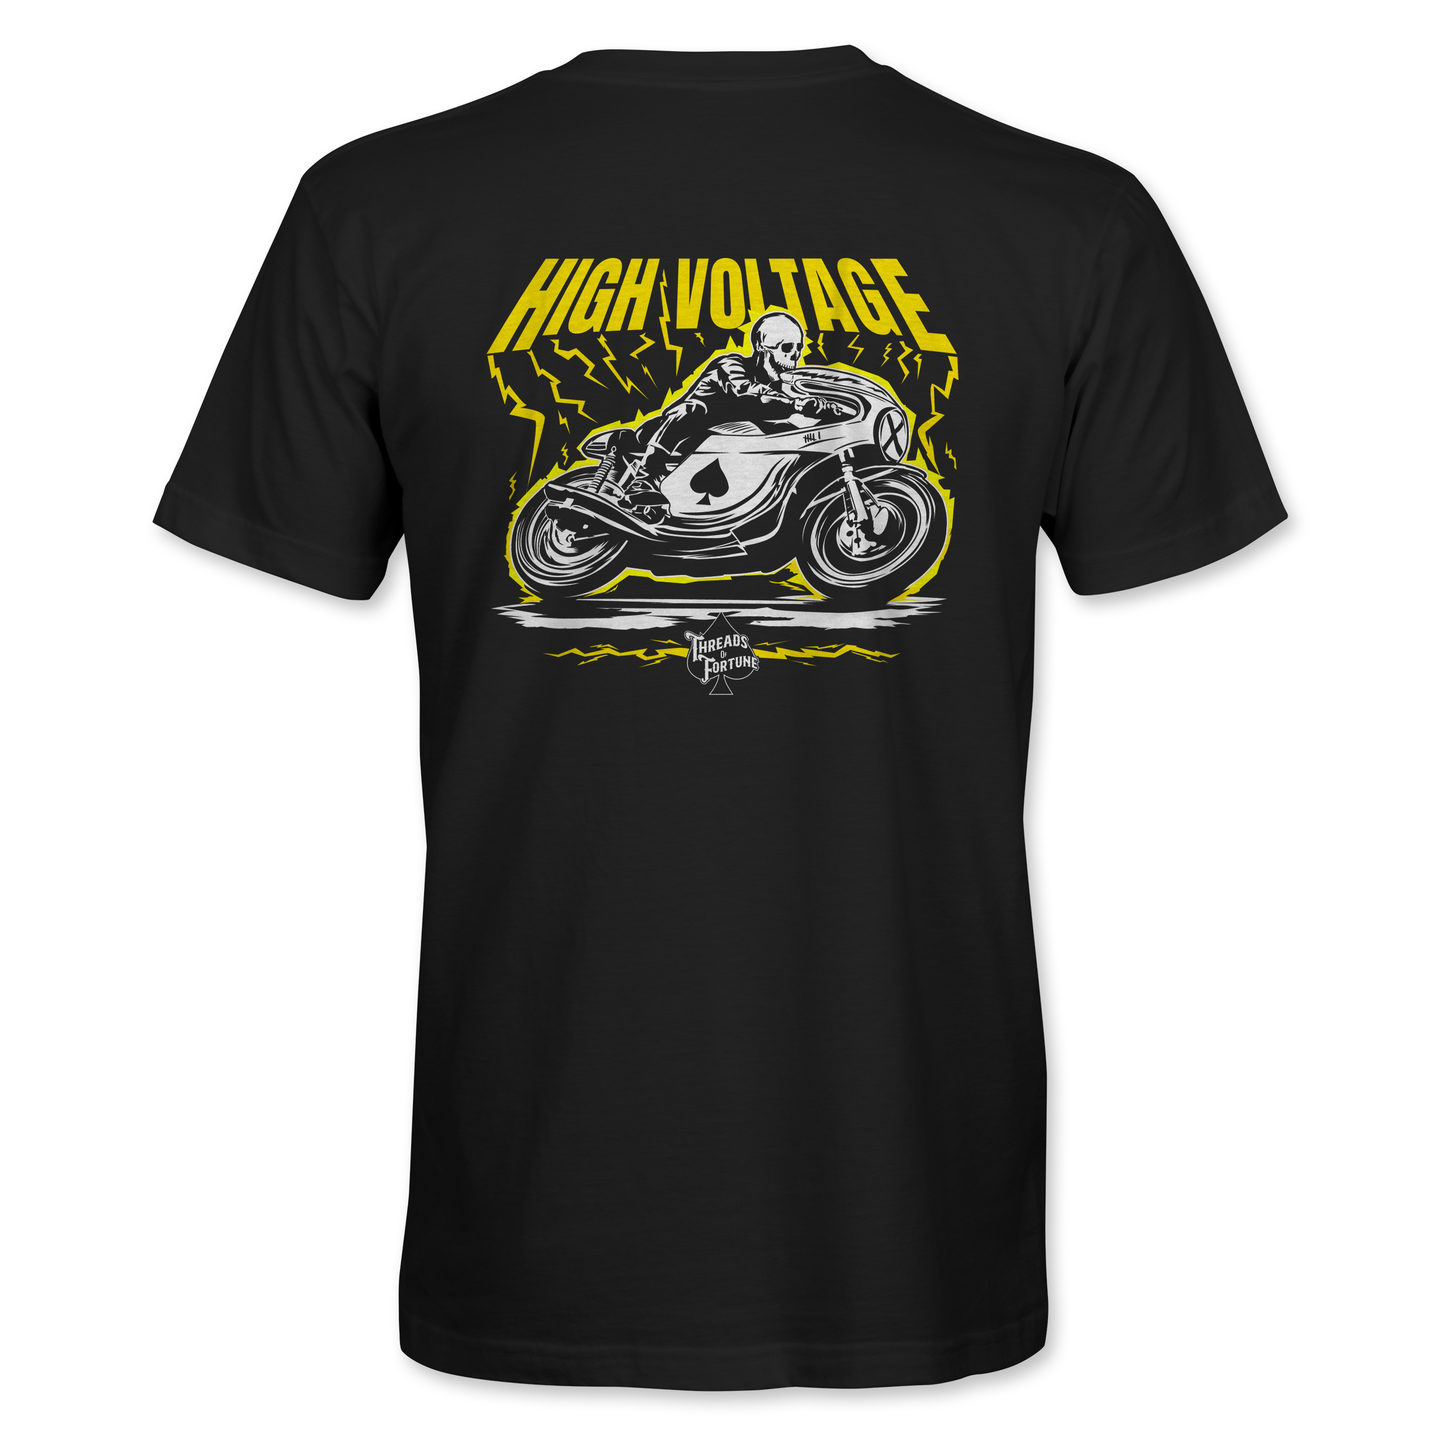 A black t-shirt with a high voltage design featuring a skeleton riding an old school Italian cafe racer motorcycle with electricity sparks